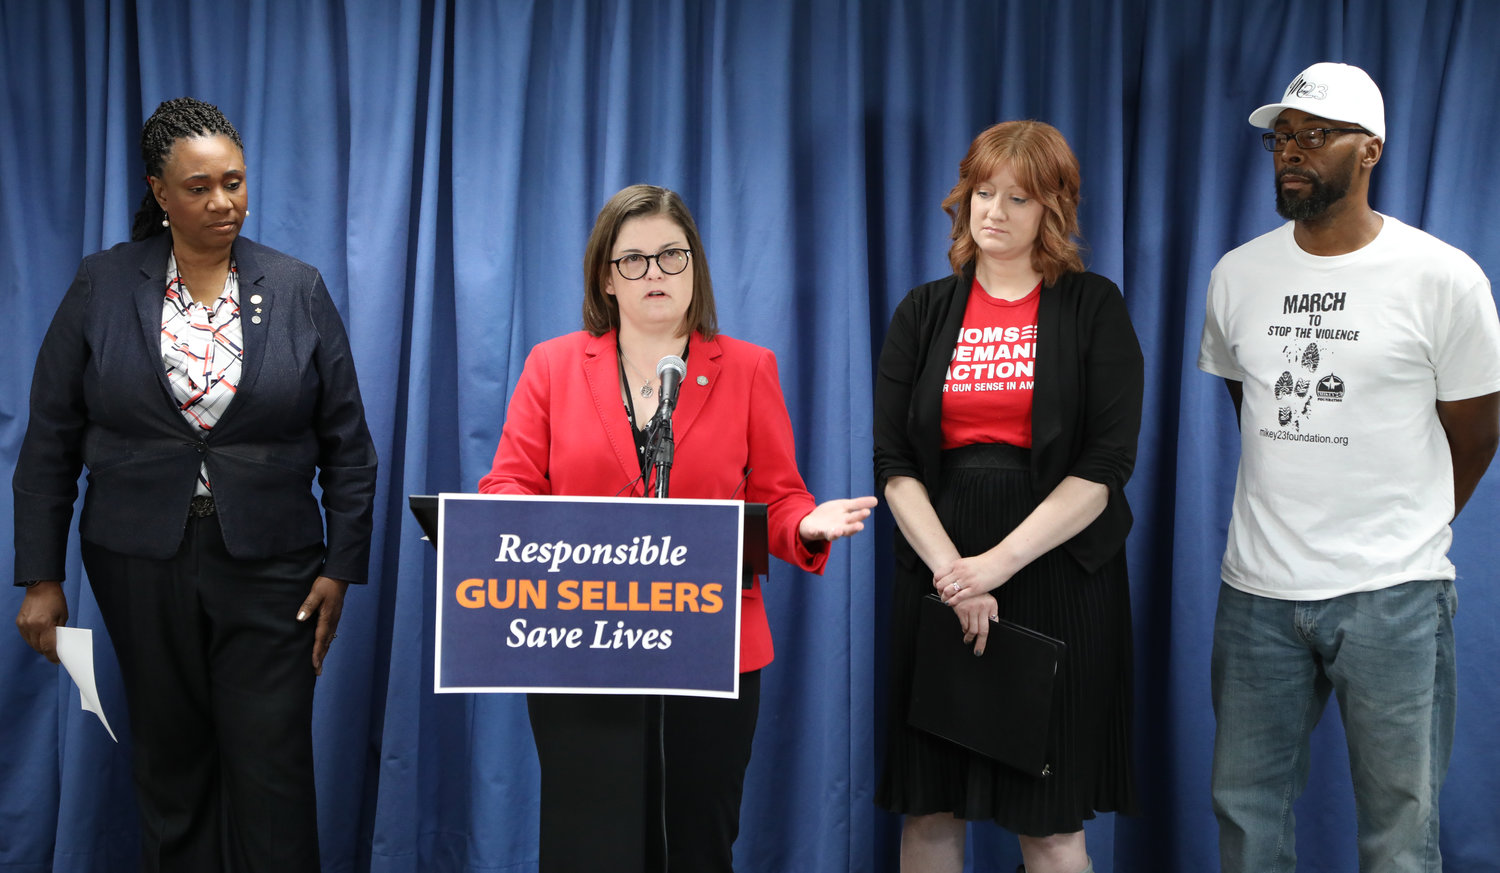 State Rep. Kara Hope, D-Holt, (in red jacket) announces legislation to tighten security at gun shops.  On her left is Rep. Stephanie Young, D-Detroit; to her right are the Rev. Christin Fawcett of Moms Demand Action and Grace Lutheran Church and Michael McKissic of the Mickey23 Foundation in Lansing.